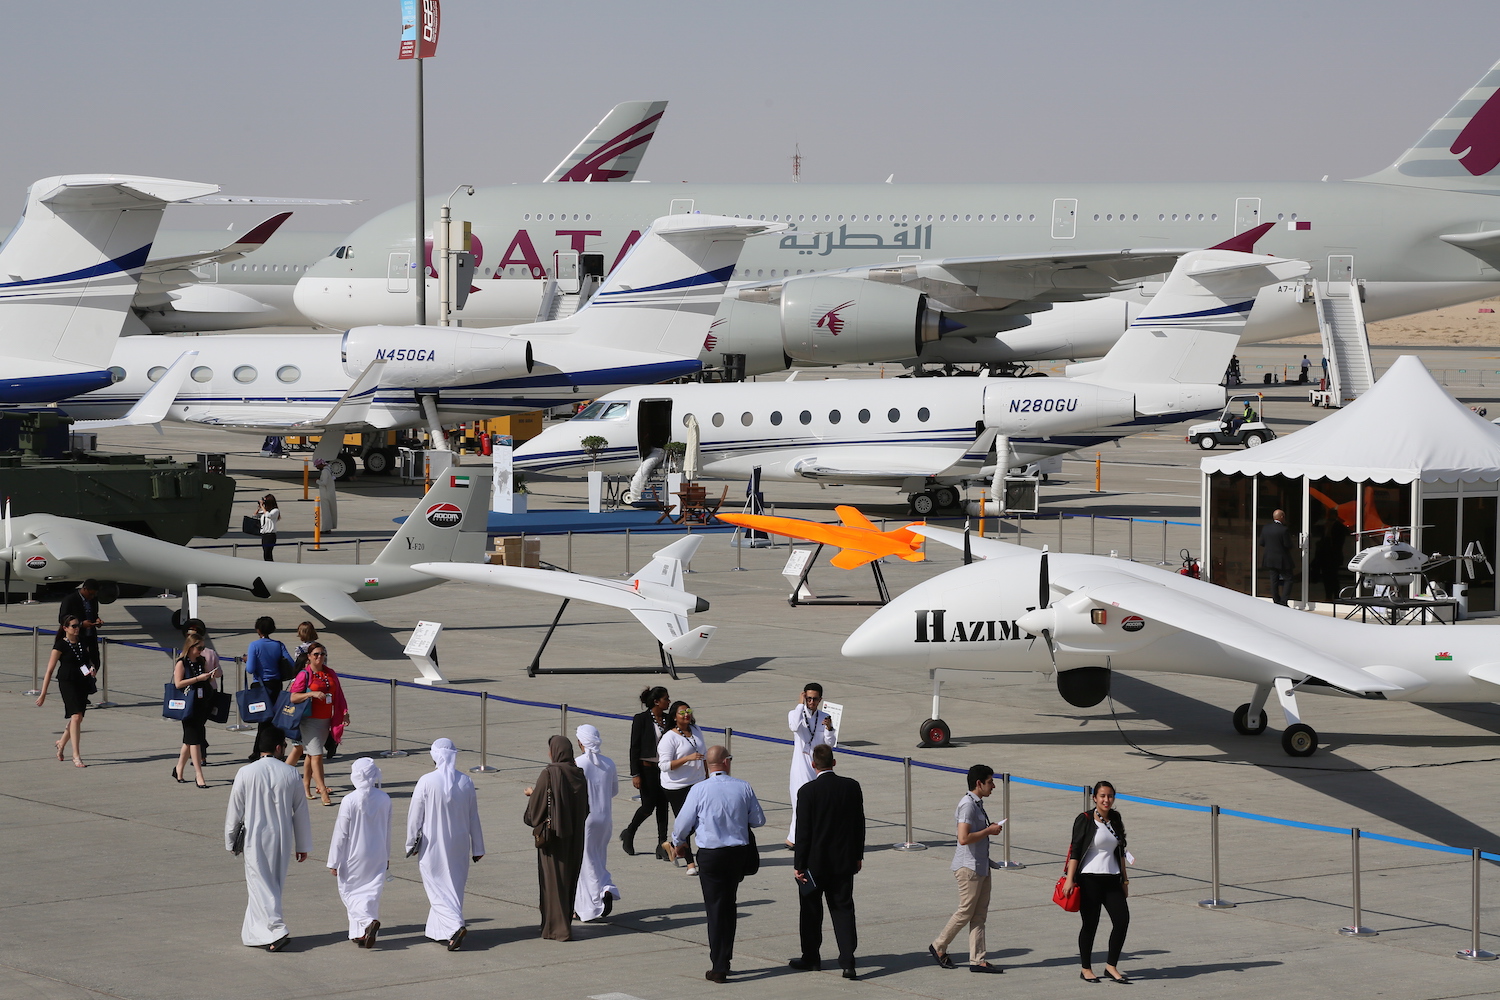 Dubai Airshow Increases Industry Appeal for 2017 Show Airline Suppliers